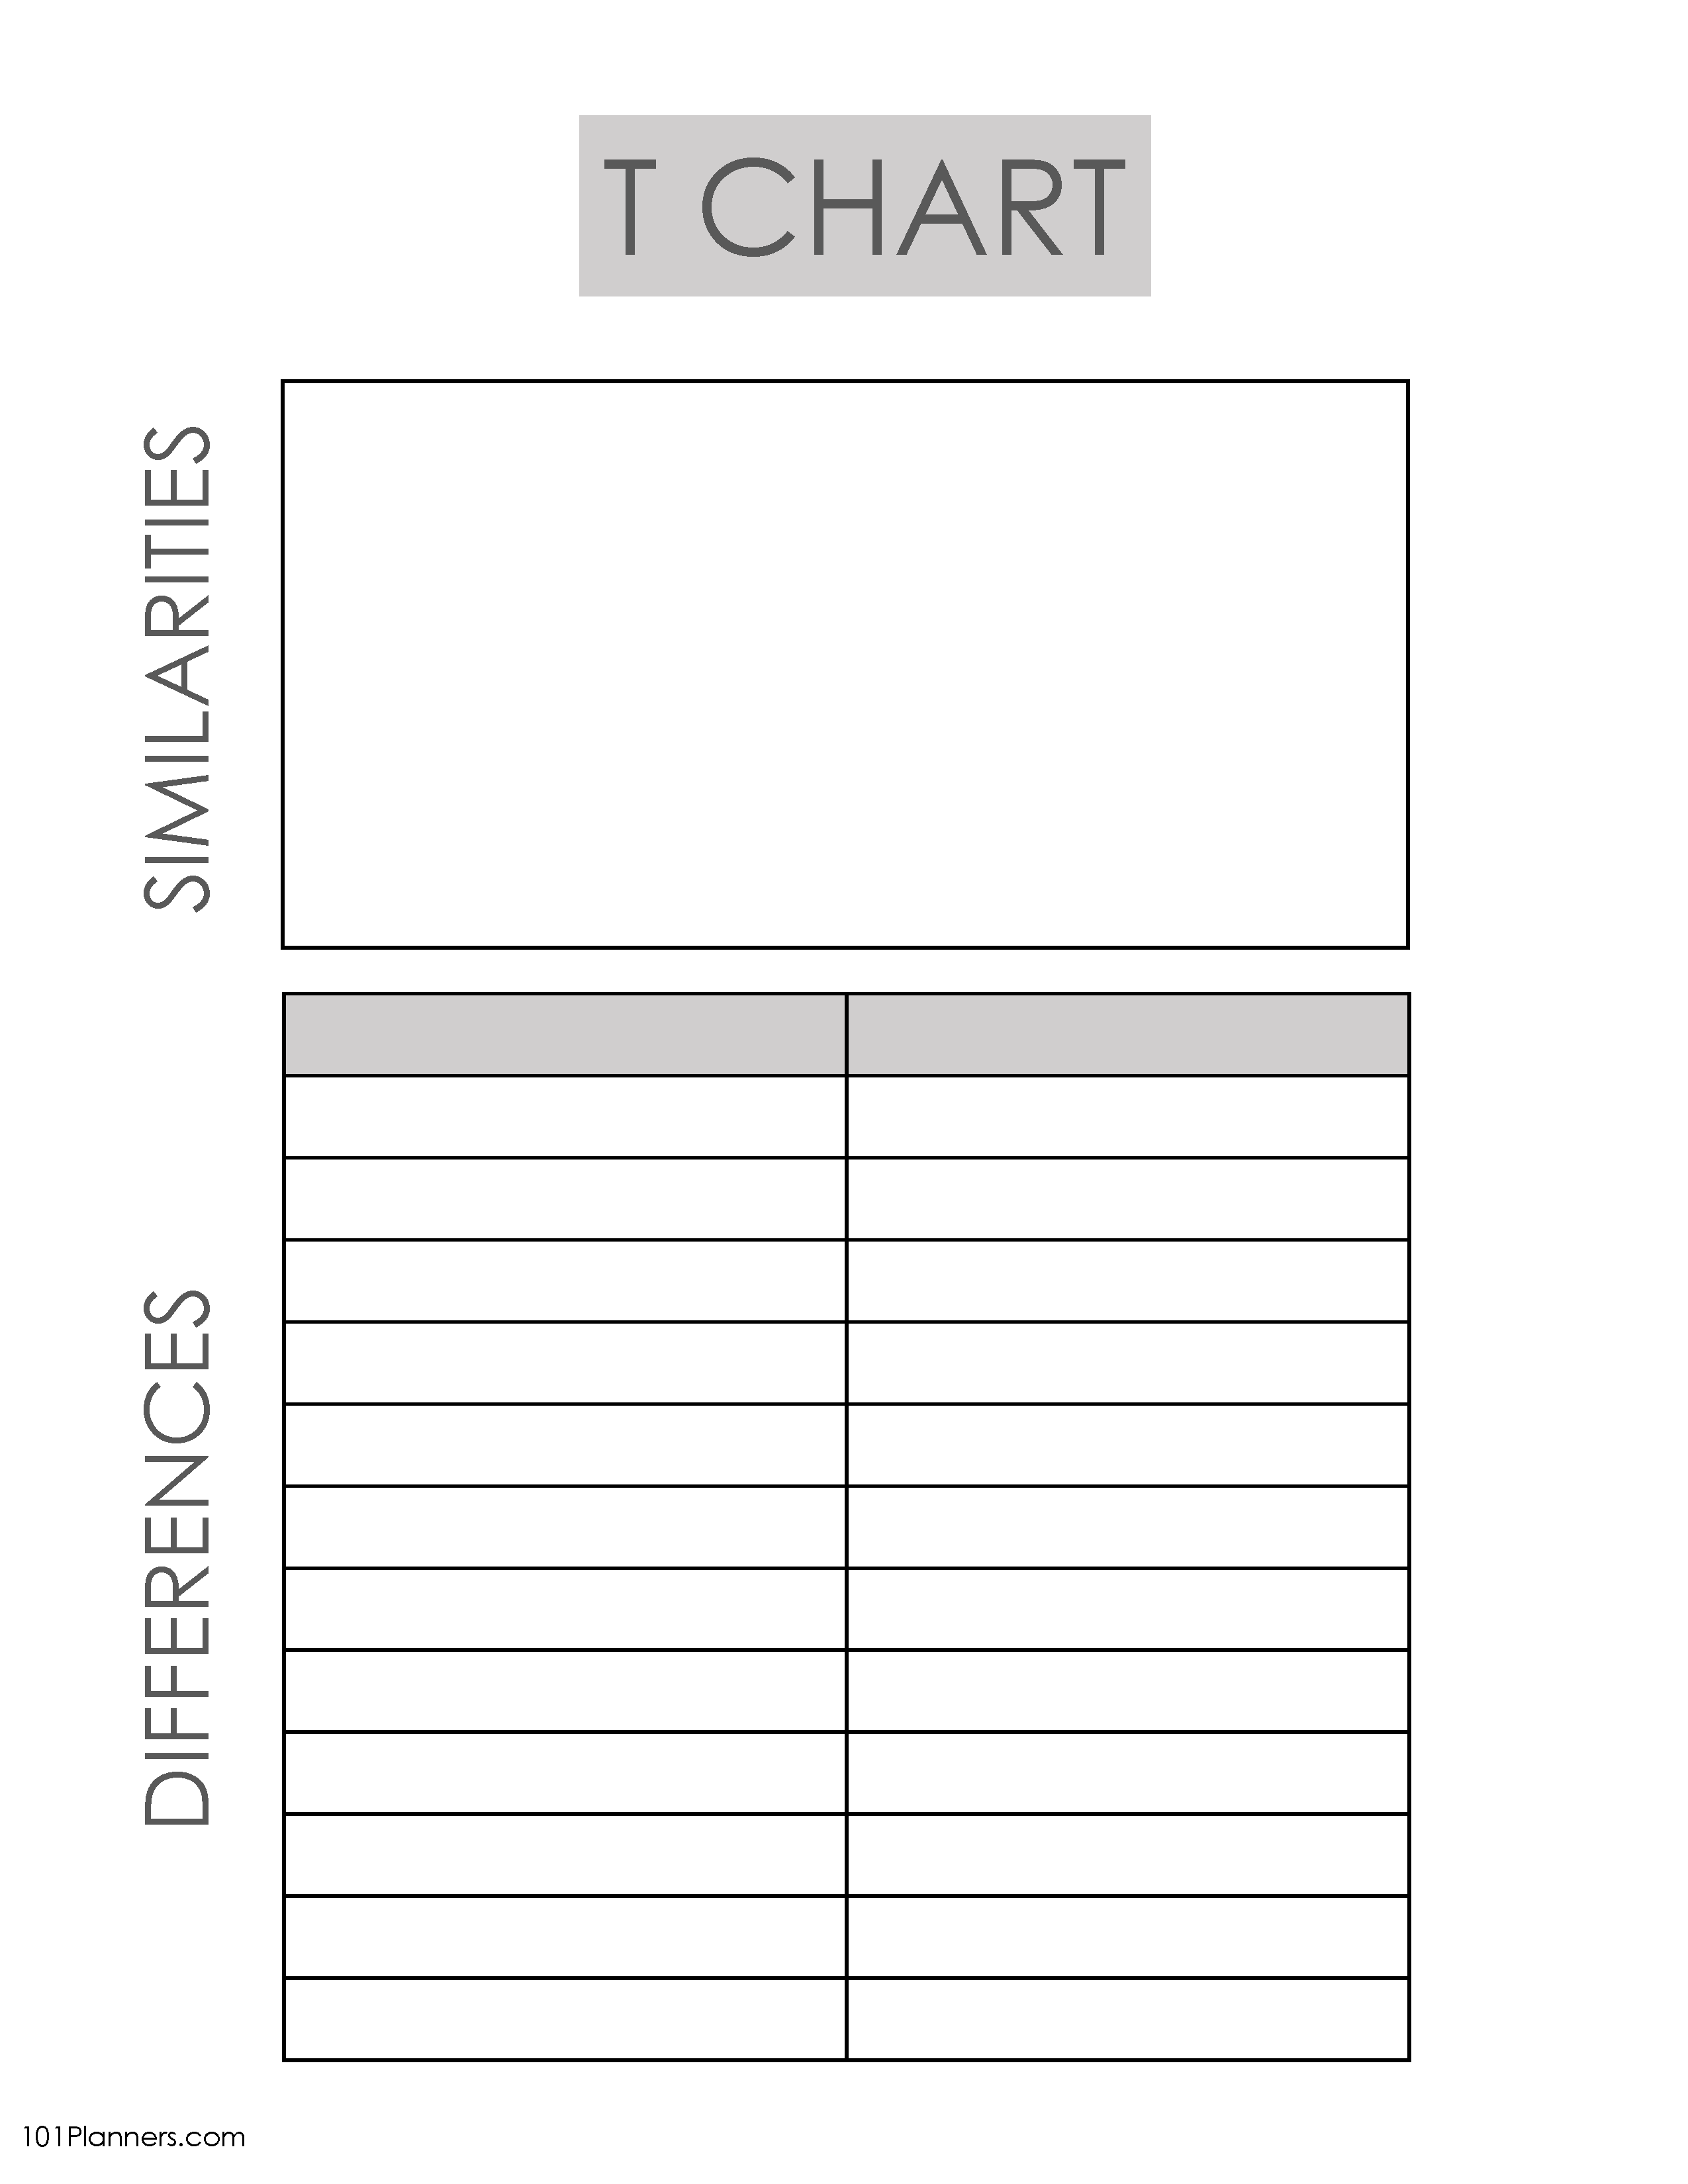 blank pros and cons chart